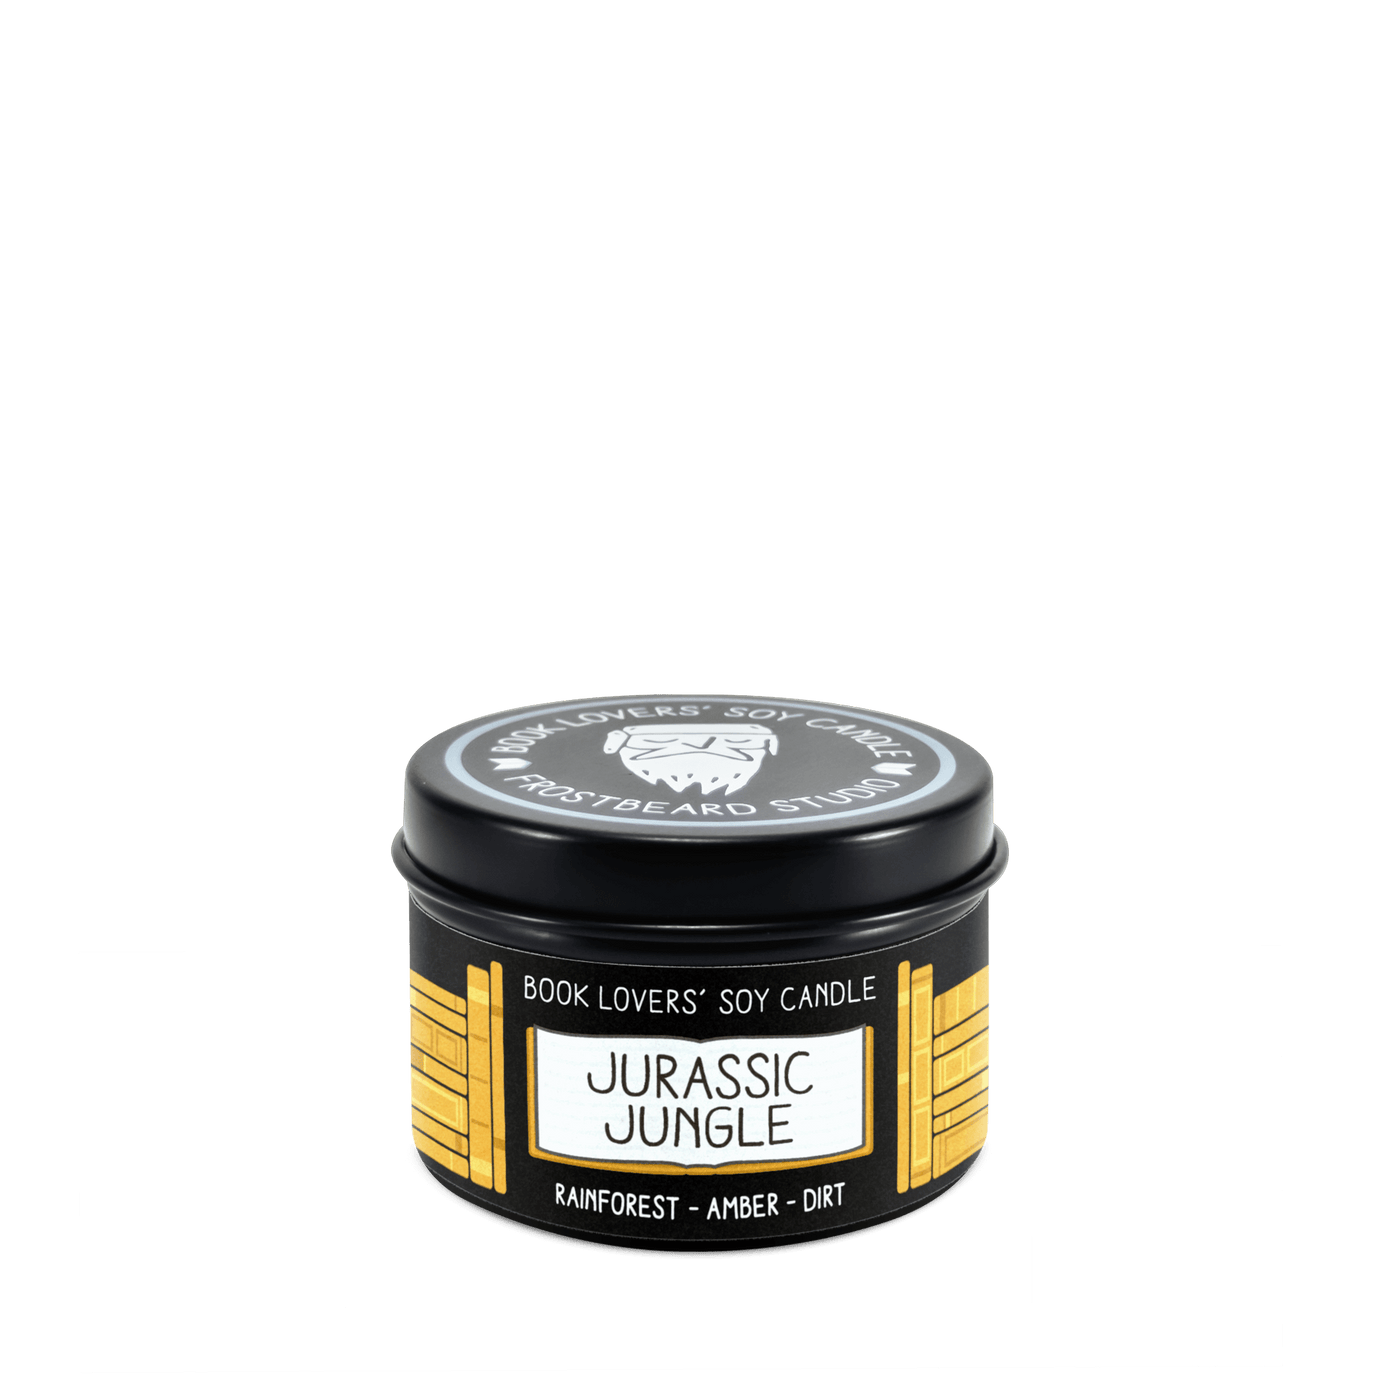 Jurassic Jungle  -  2 oz Tin  -  Book Lovers' Soy Candle  -  Frostbeard Studio